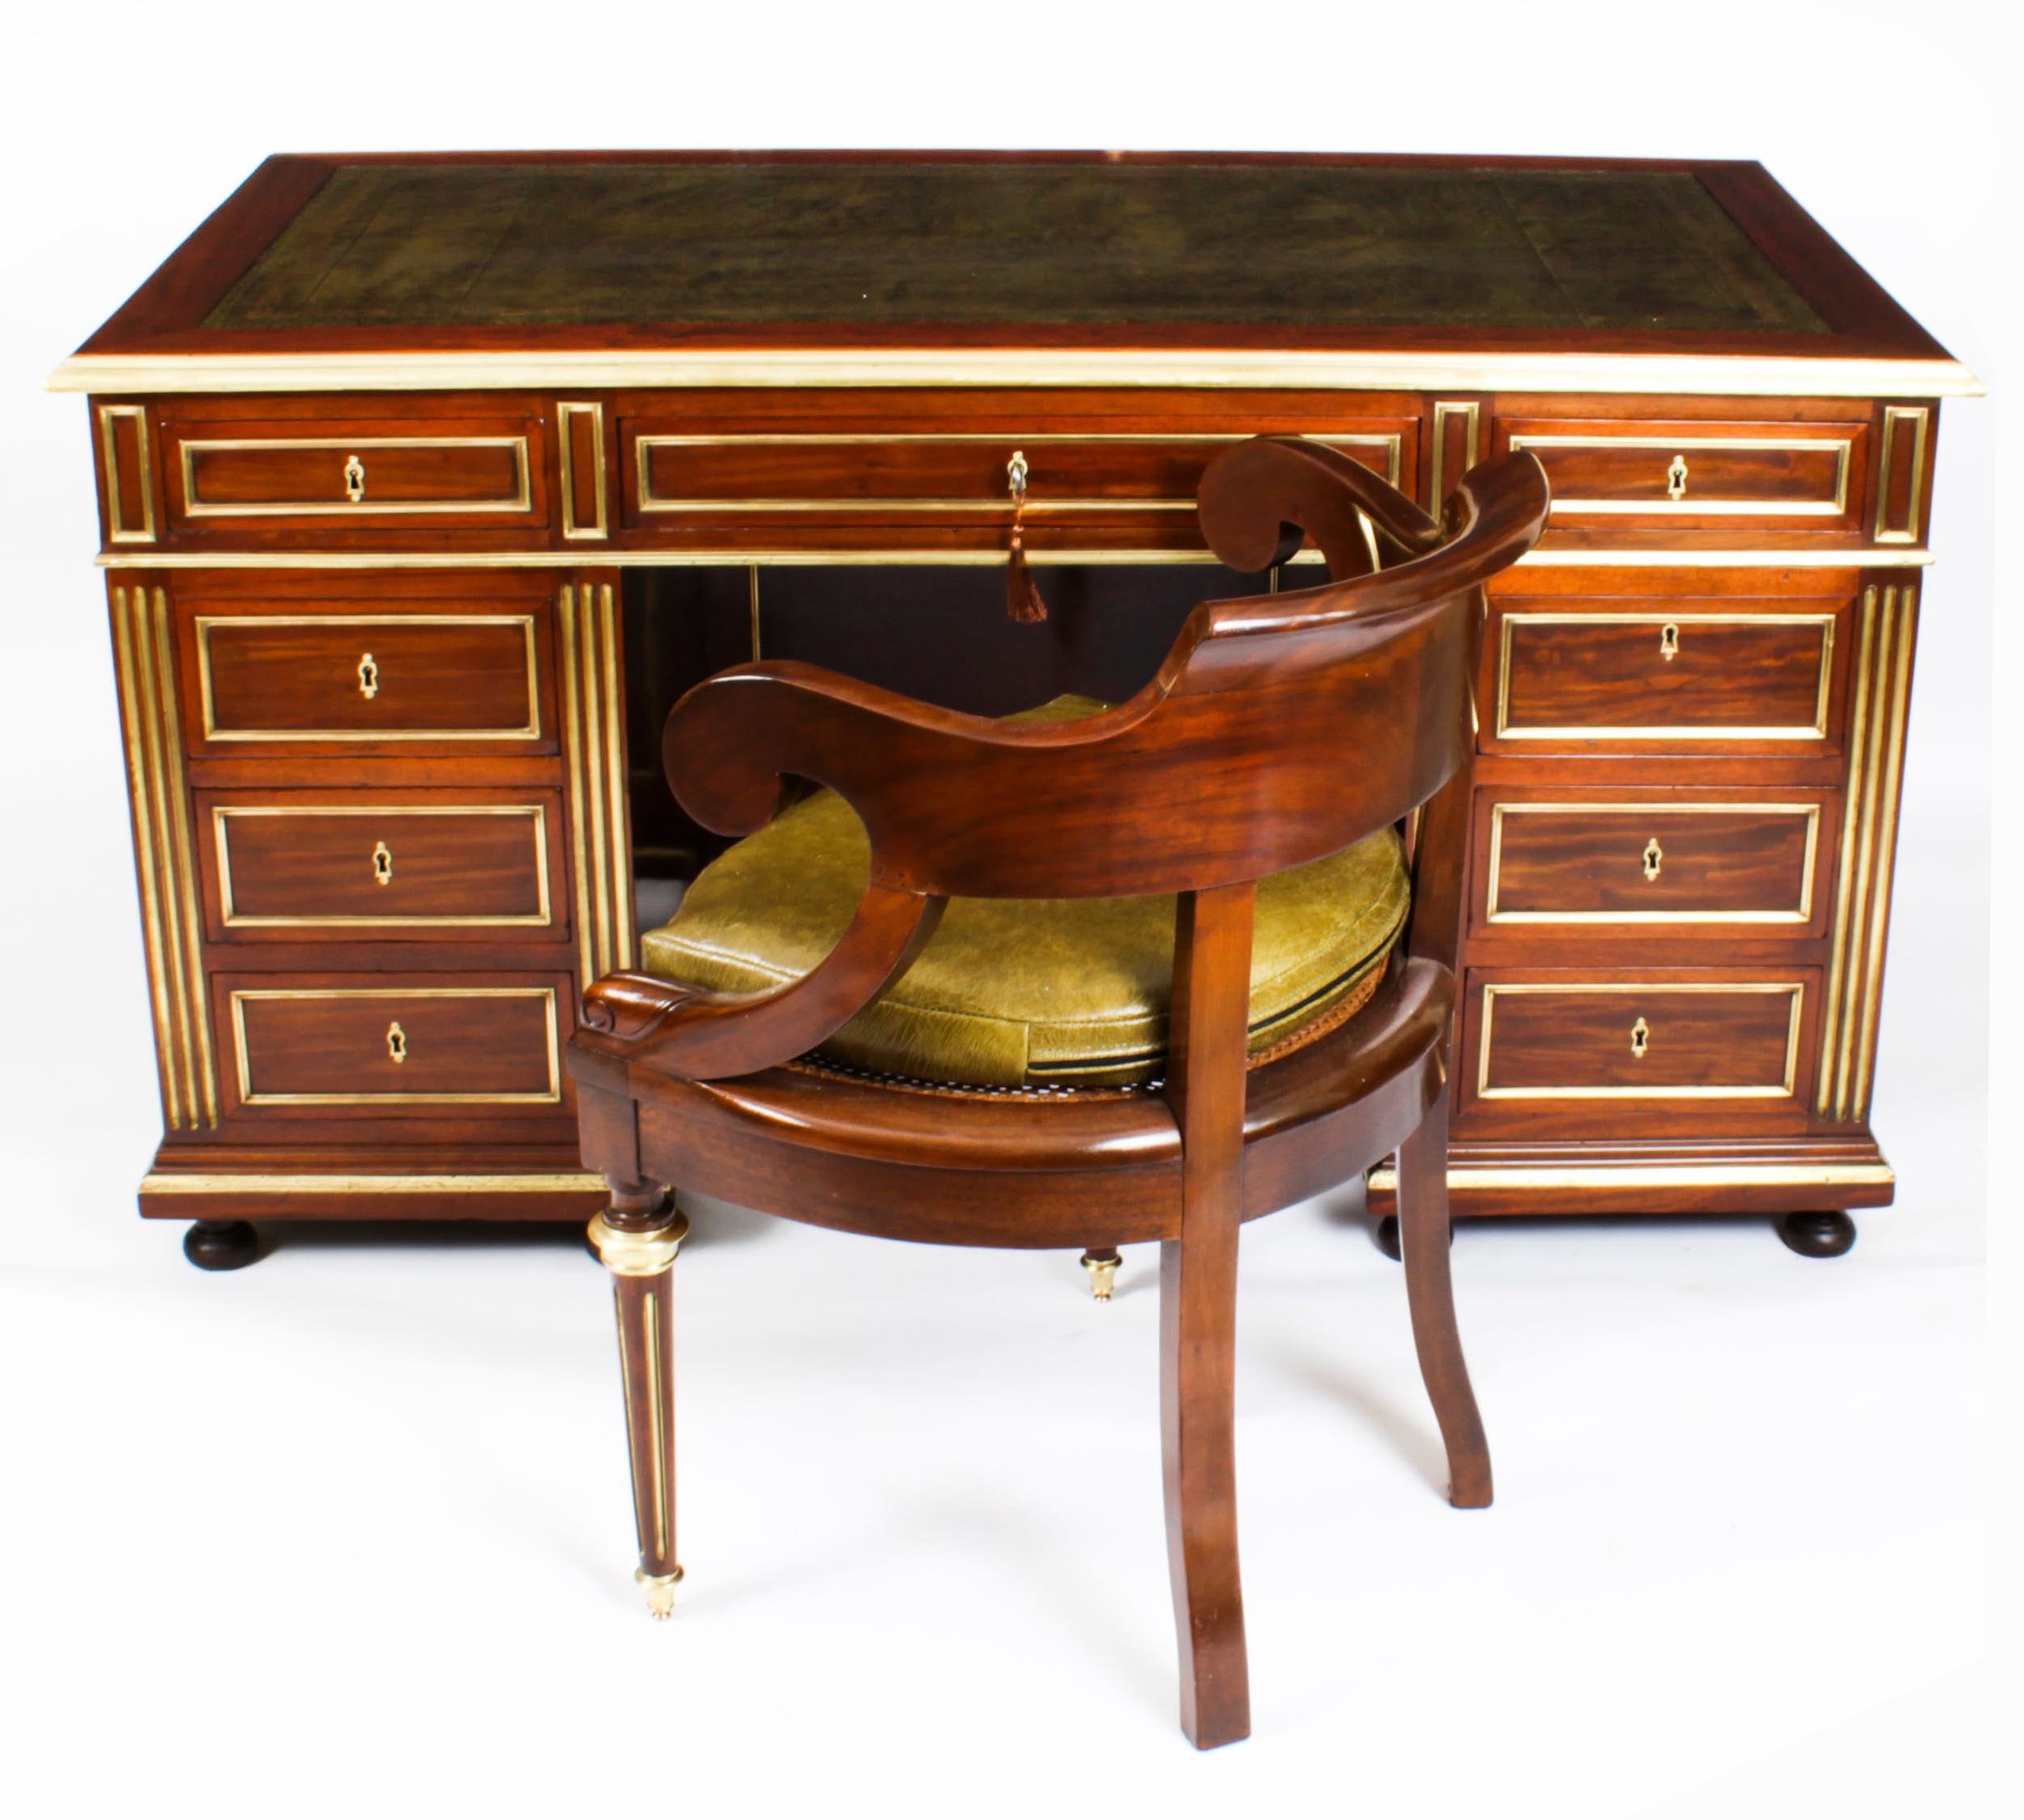 A superb French Directoire Ormolu mounted pedestal desk & armchair set, Circa 1850 in date.
 
The desk has a rectangular top with an inset gilt-tooled green leather writing surface and trimmed with ormolu borders above three frieze drawers and a